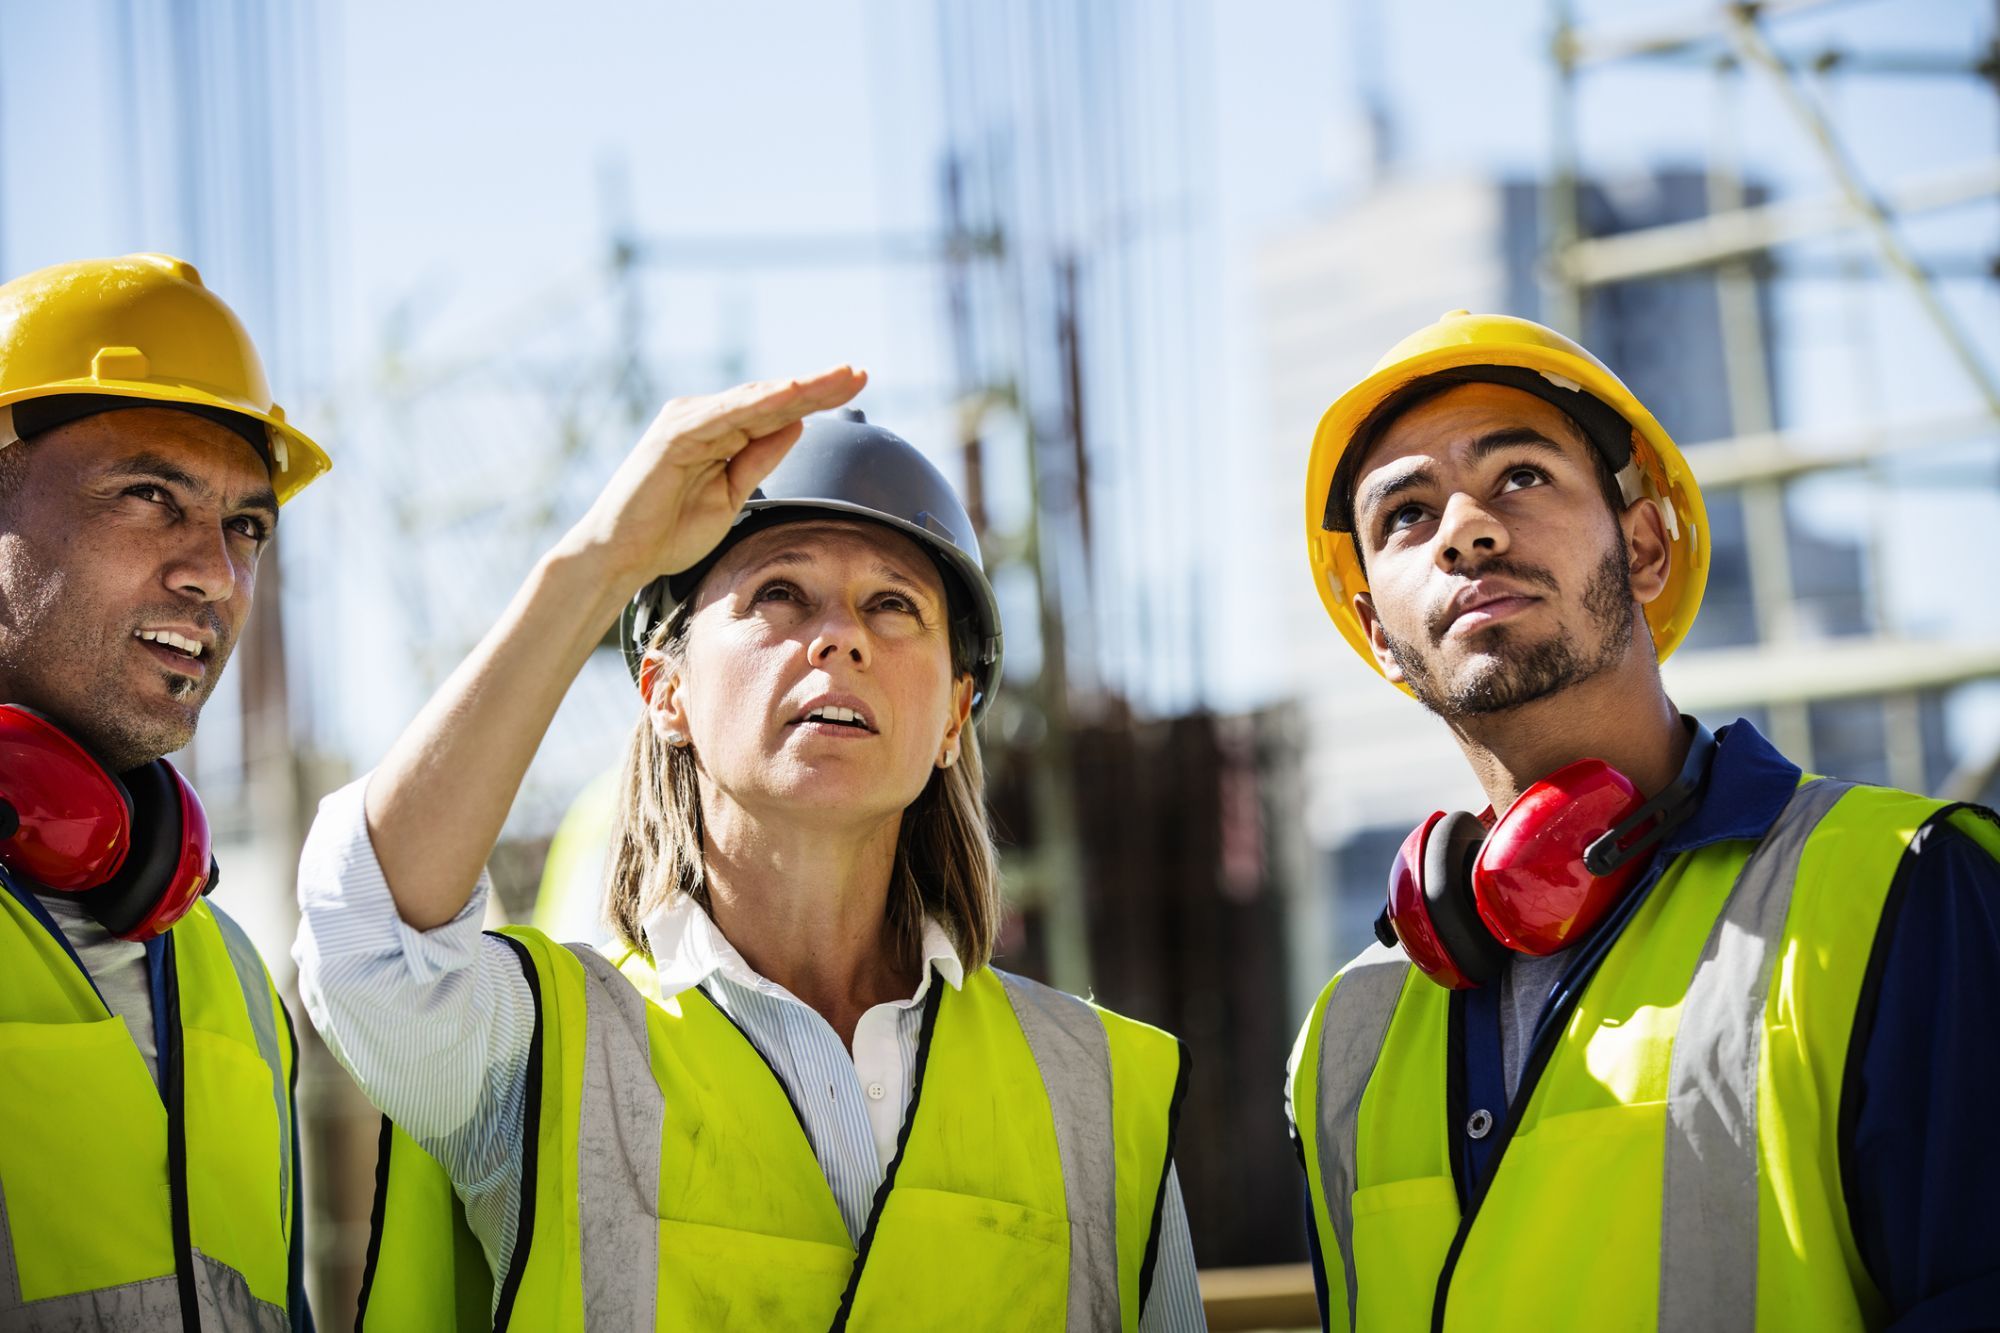 Construction’s Gender Pay Gap Among Nation’s Worst